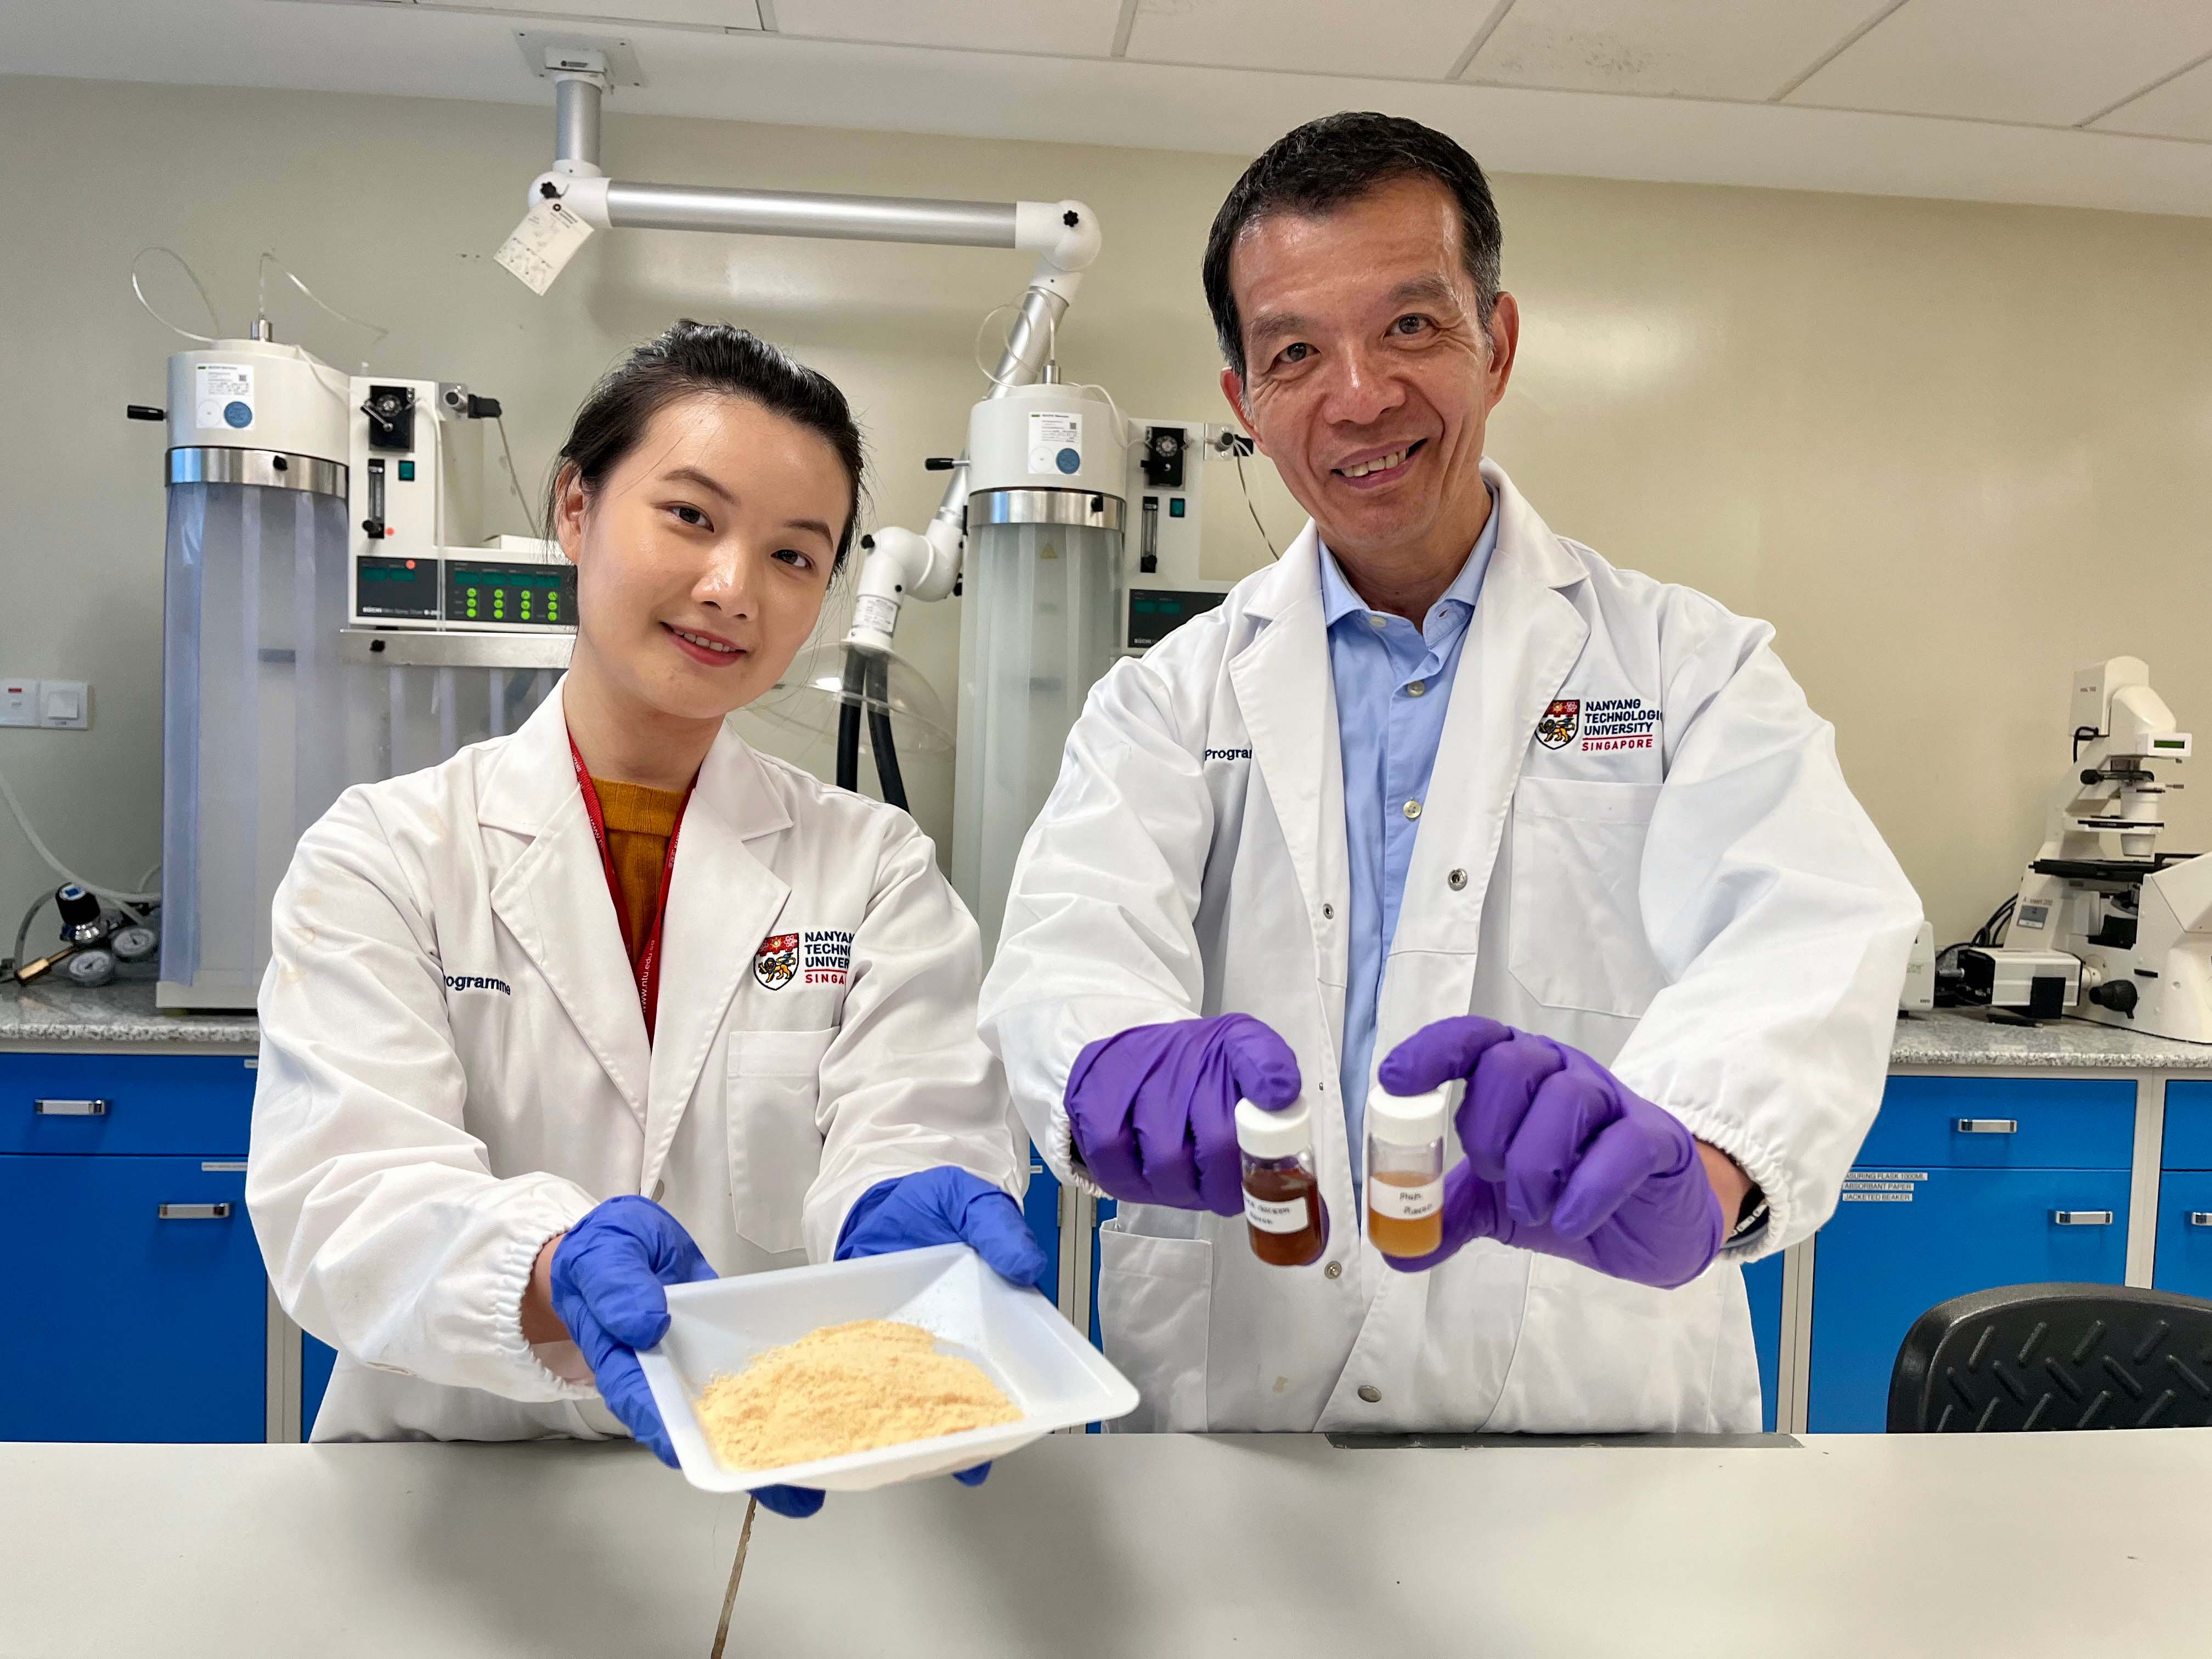 Director of NTU's Food Science and Technology Programme (FST) Professor William Chen, with FST Project Officer Ms Amanda Voo Ying Hui, presenting the new food flavour additives.